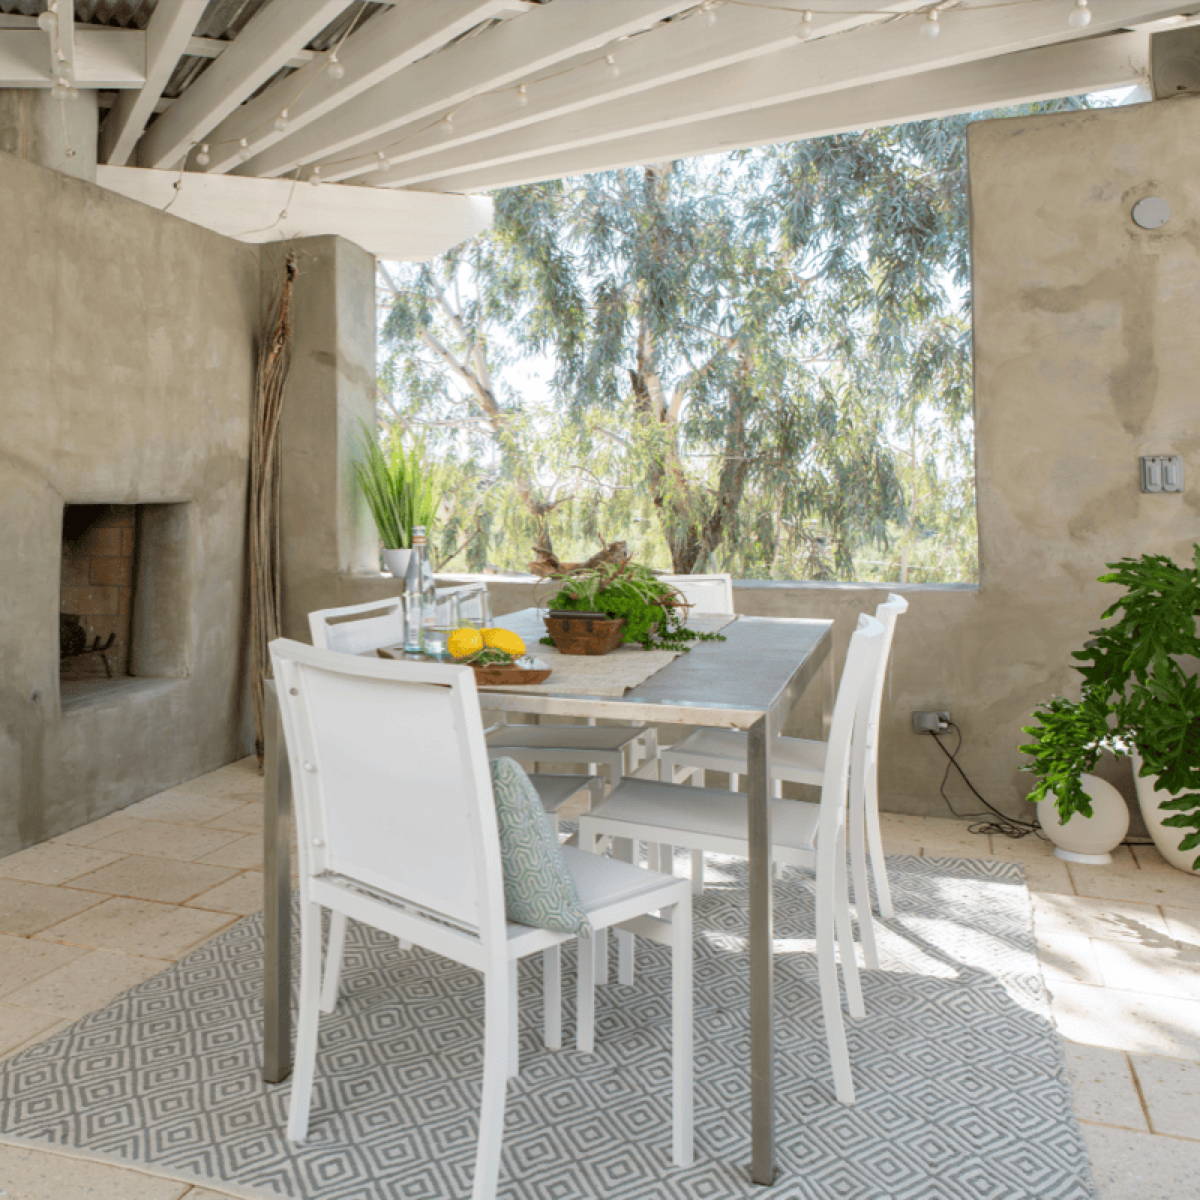 A pastel color palette in this outdoor kitche